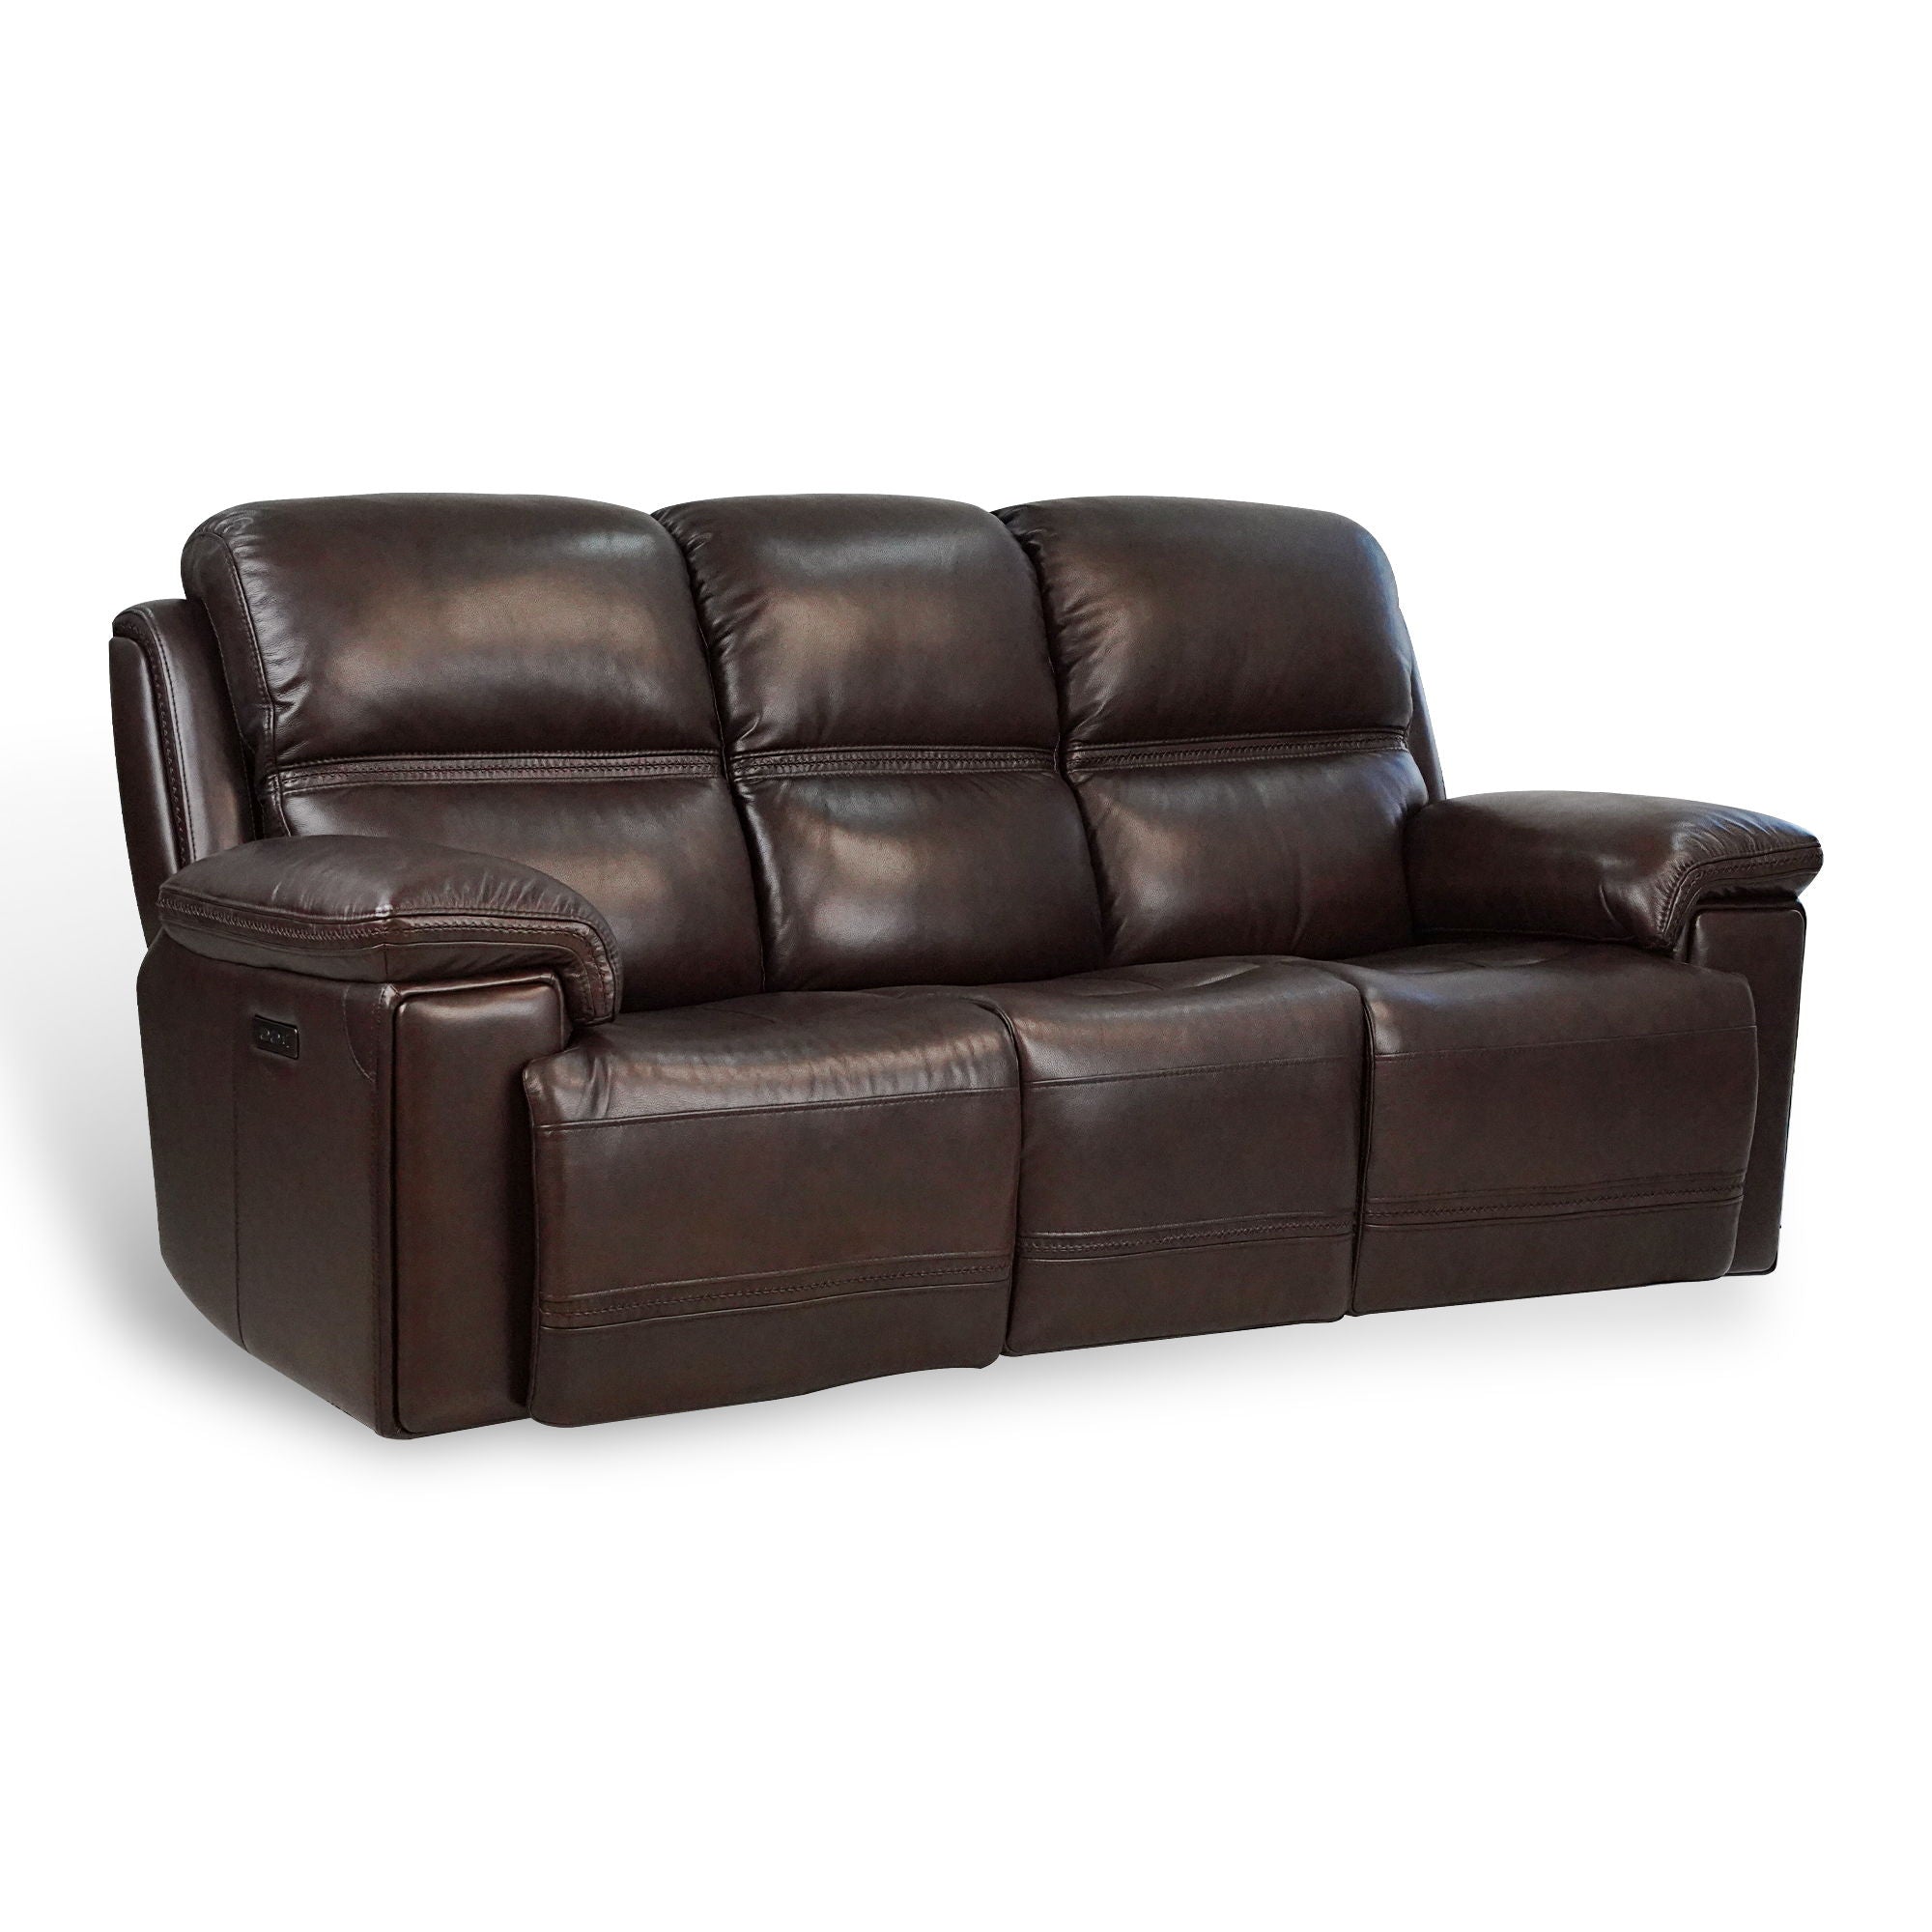 Timo Top Grain Leather Power Reclining Sofa Adjustable Headrest Cross Stitching All Seat With Dual Power